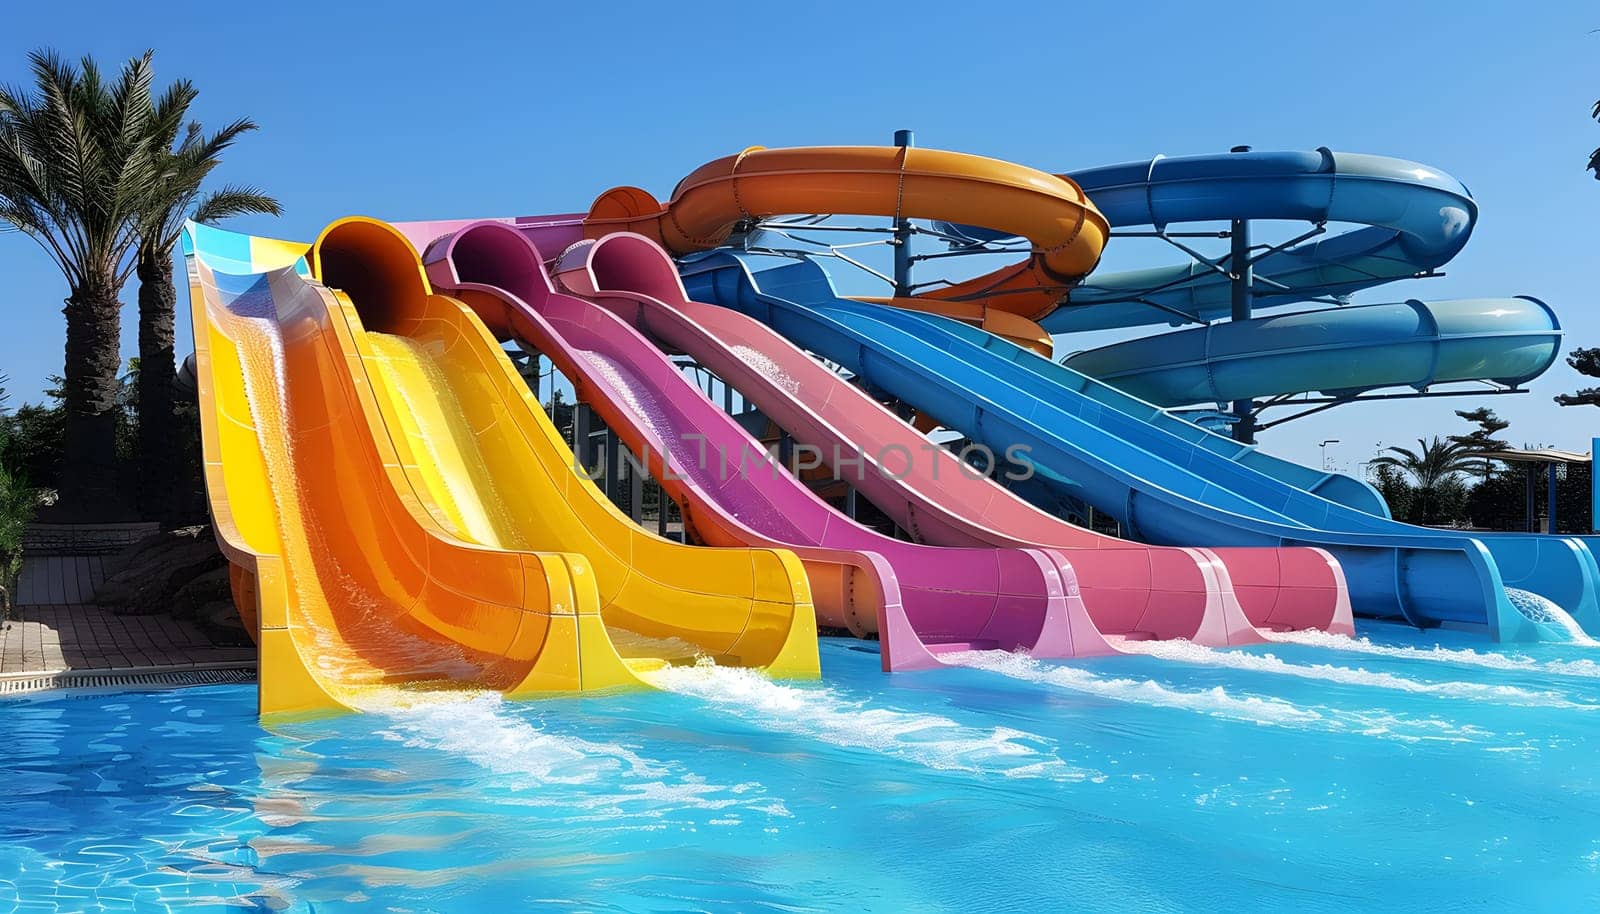 Enjoy a funfilled day at our Aqua Park with vibrant water slides, swimming pools, and chutes. Perfect for leisure and family travel under the sunny sky